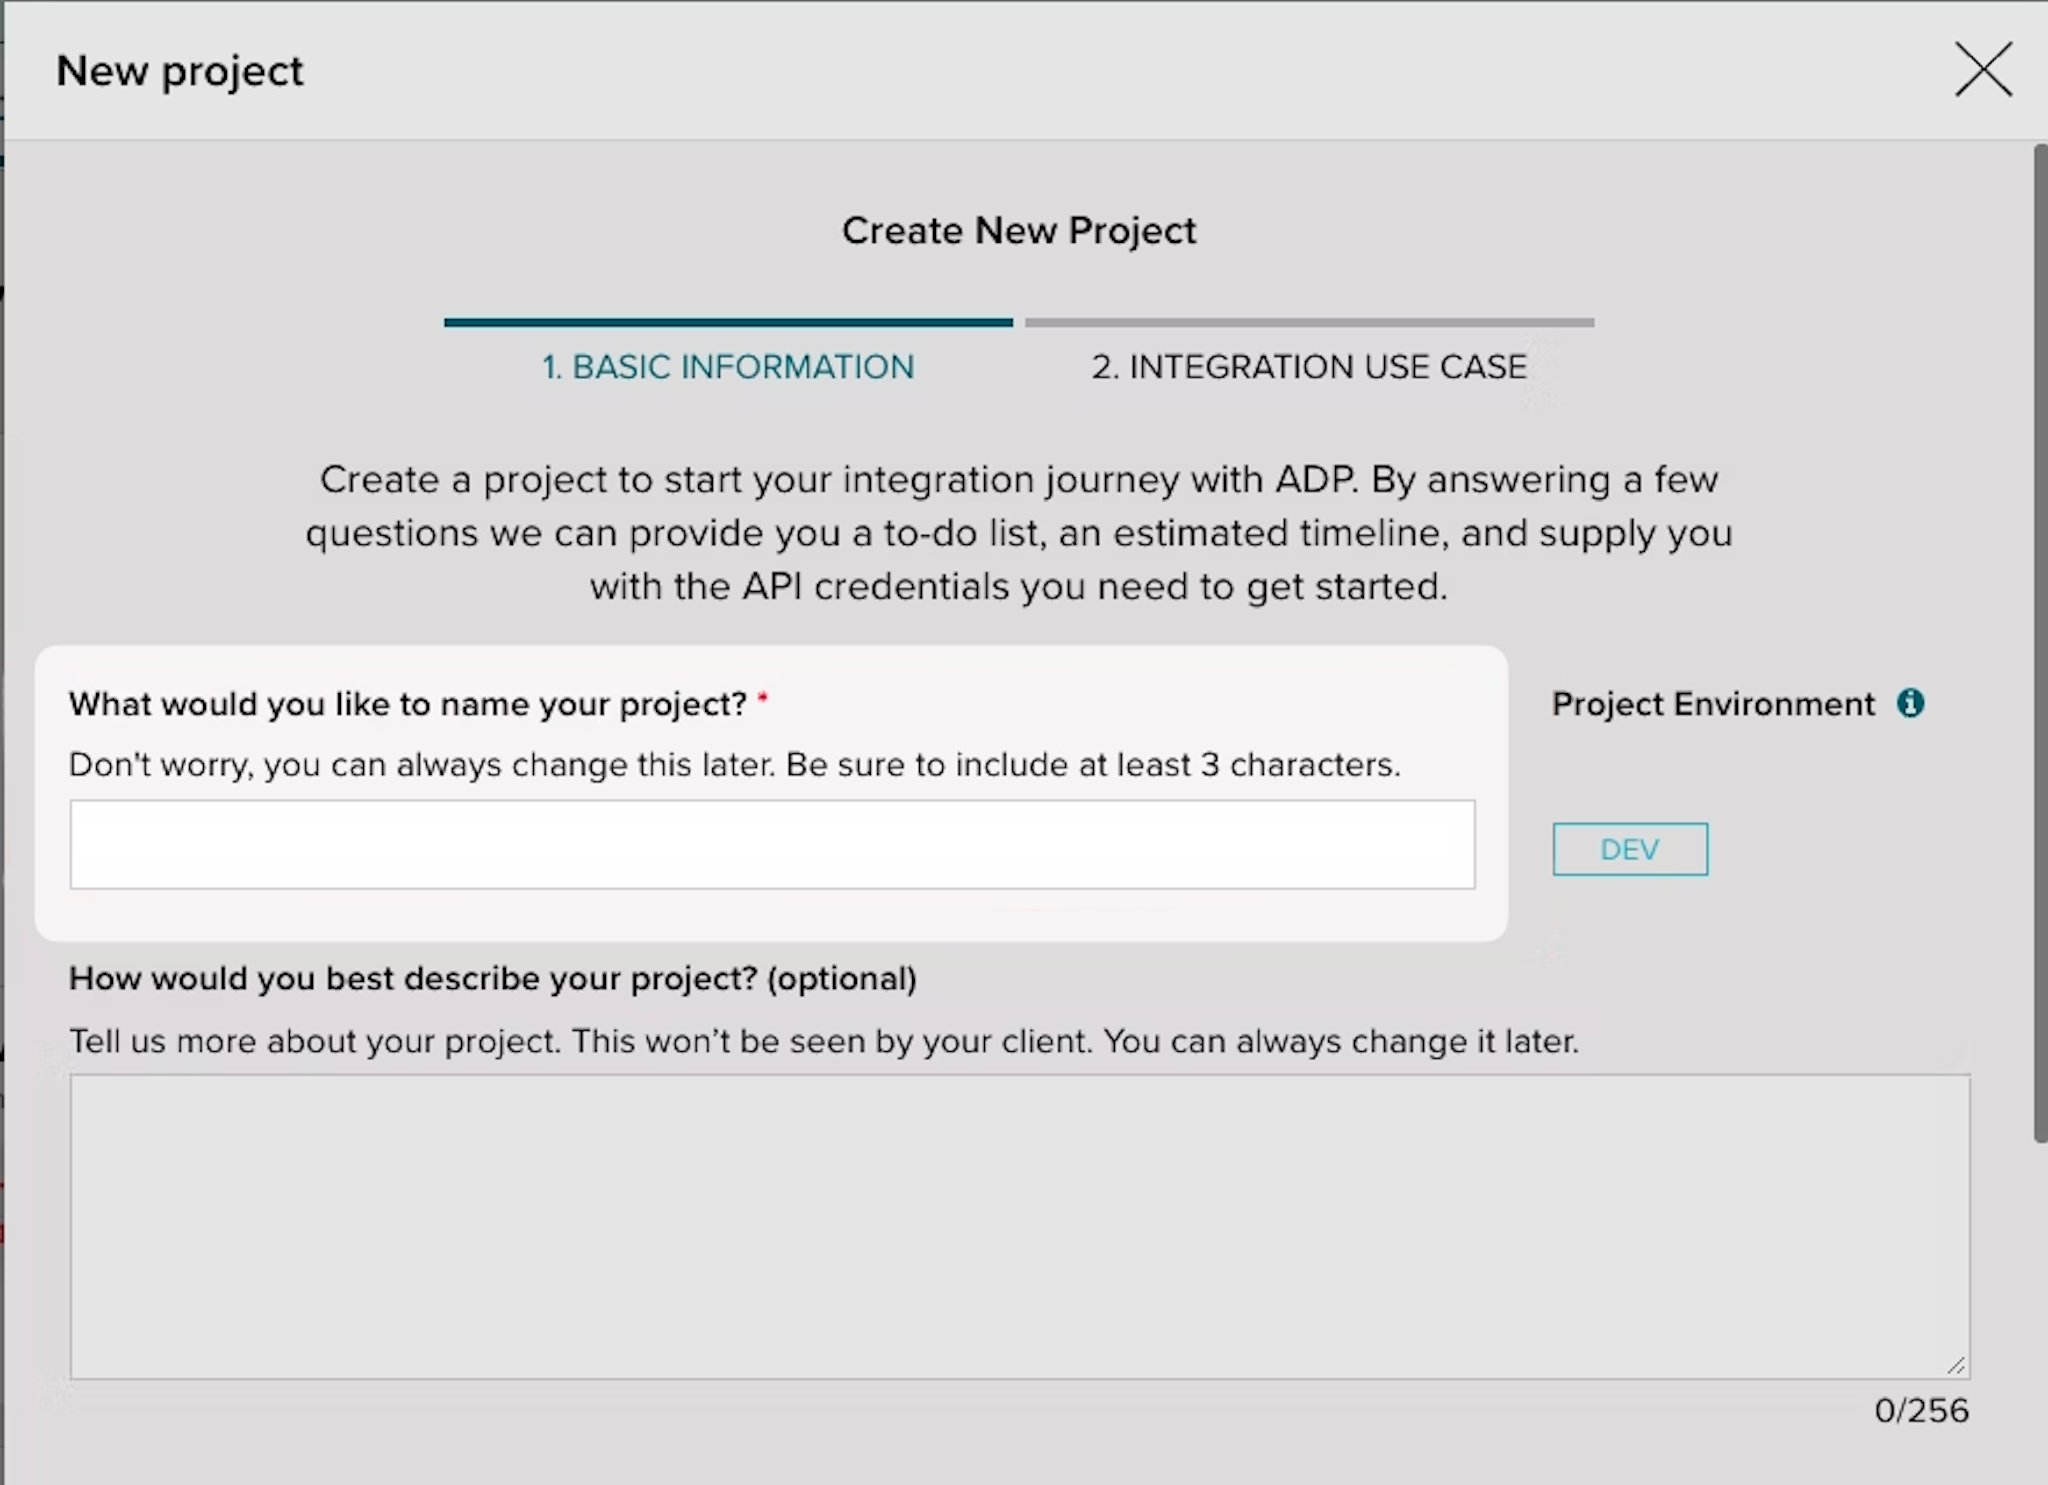 A screenshot showing the Create New Project details in the ADP Partner Self Service Portal.